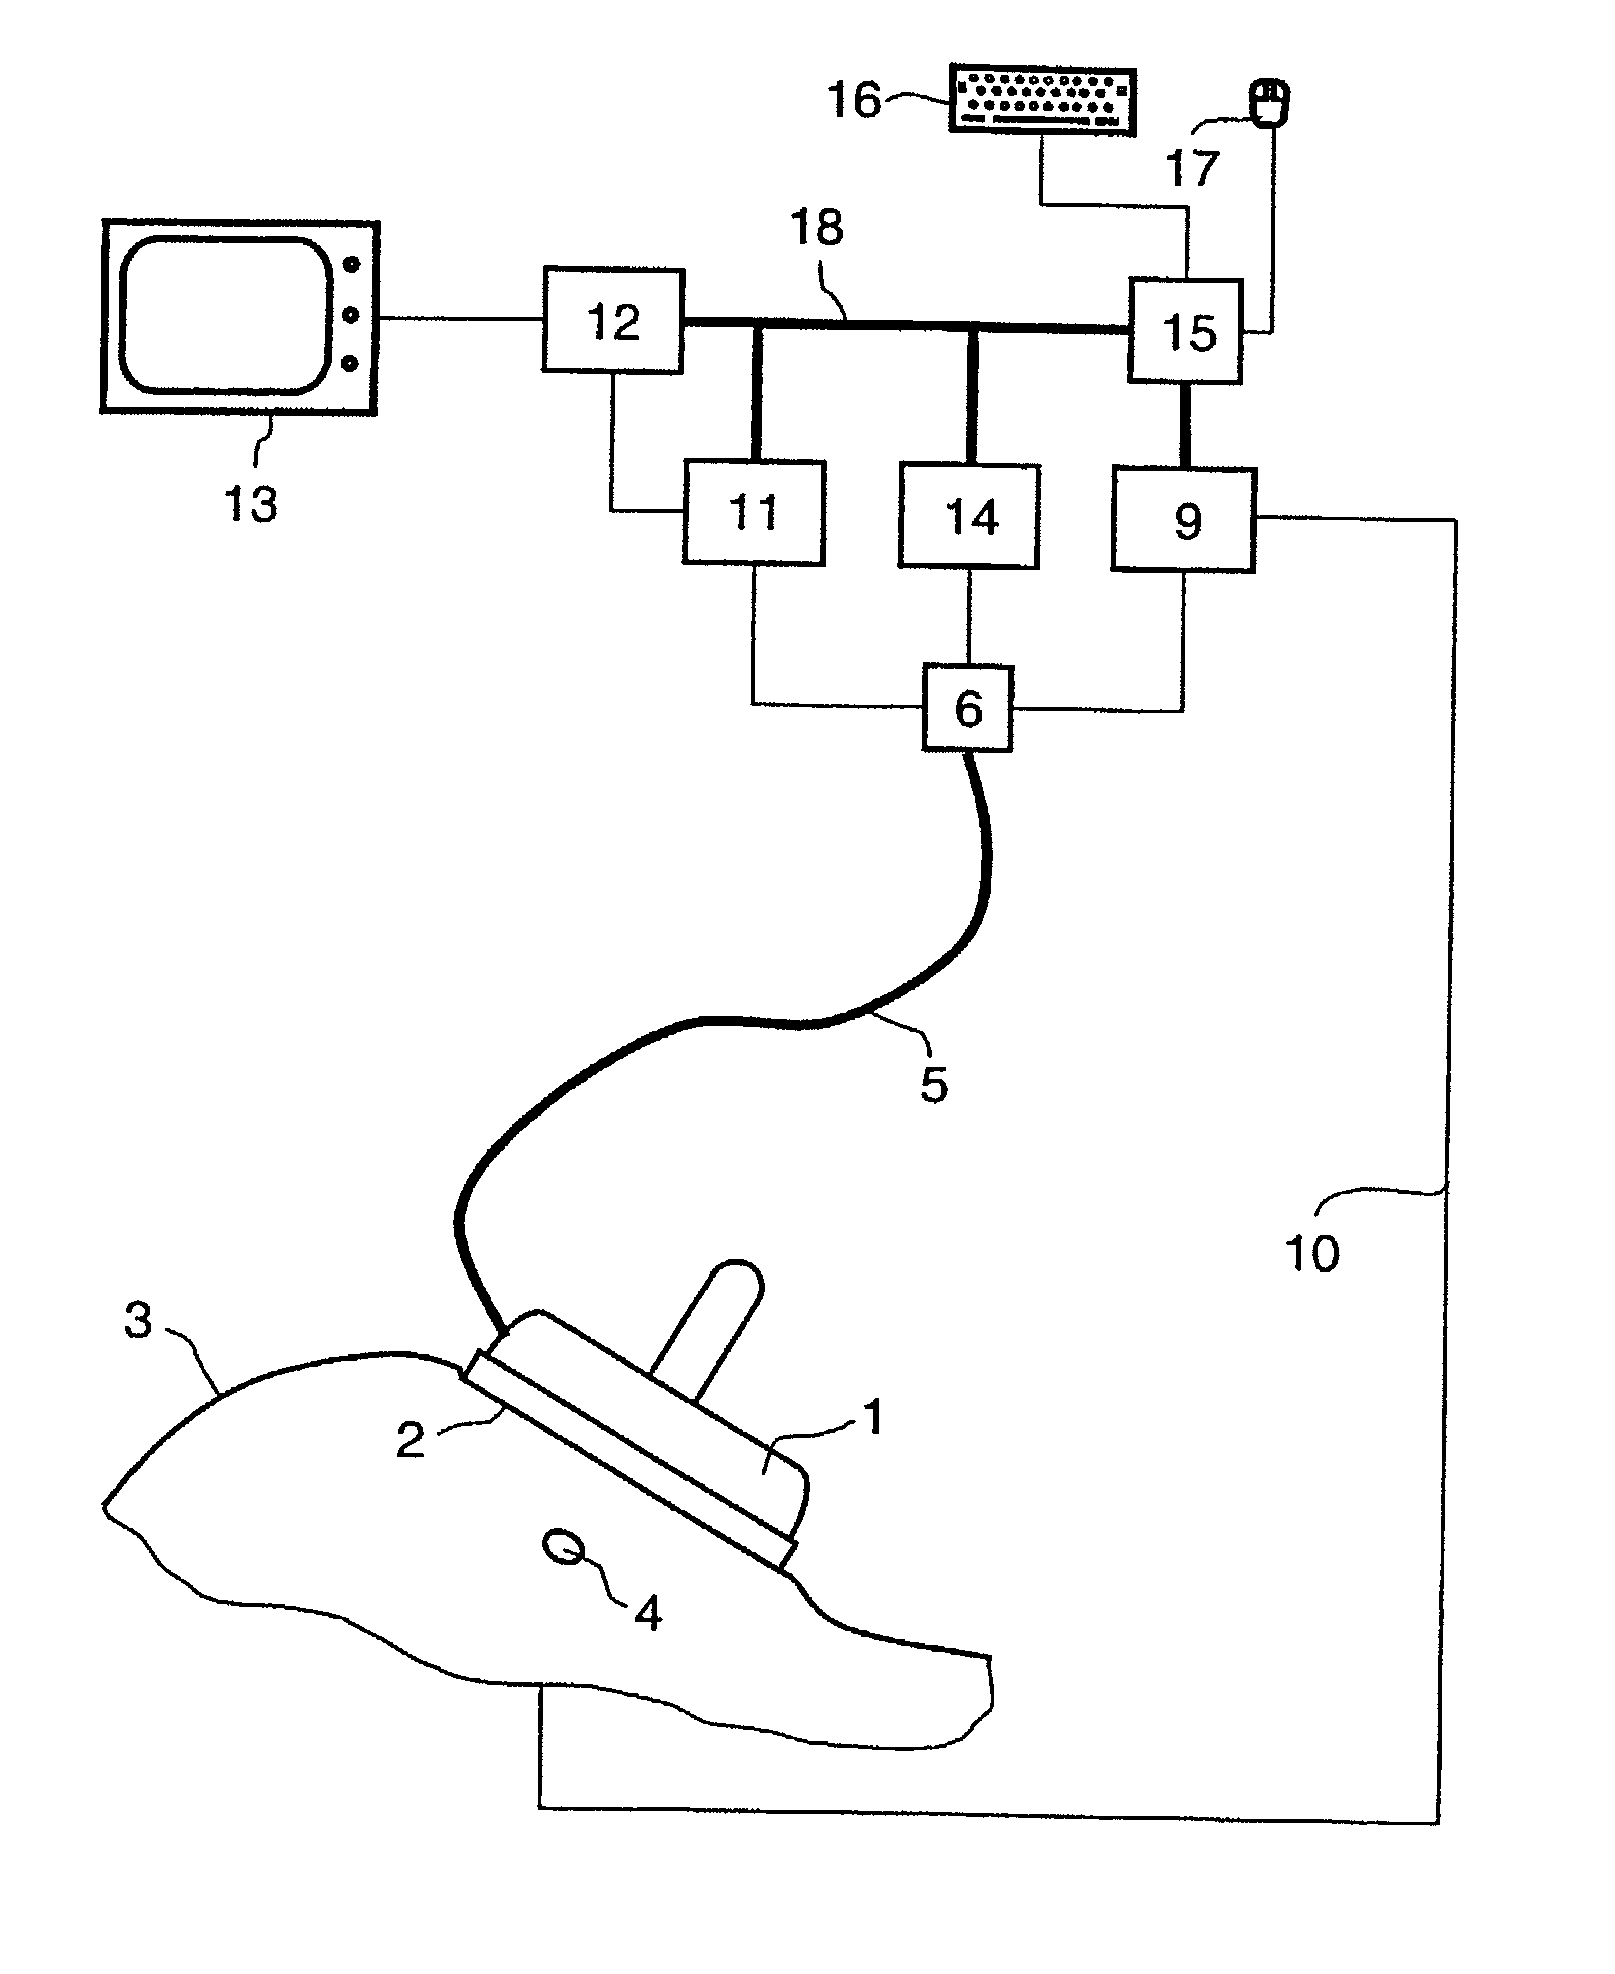 Measurement system for examining a section of tissue on a patient and the use of a measurement system of this type